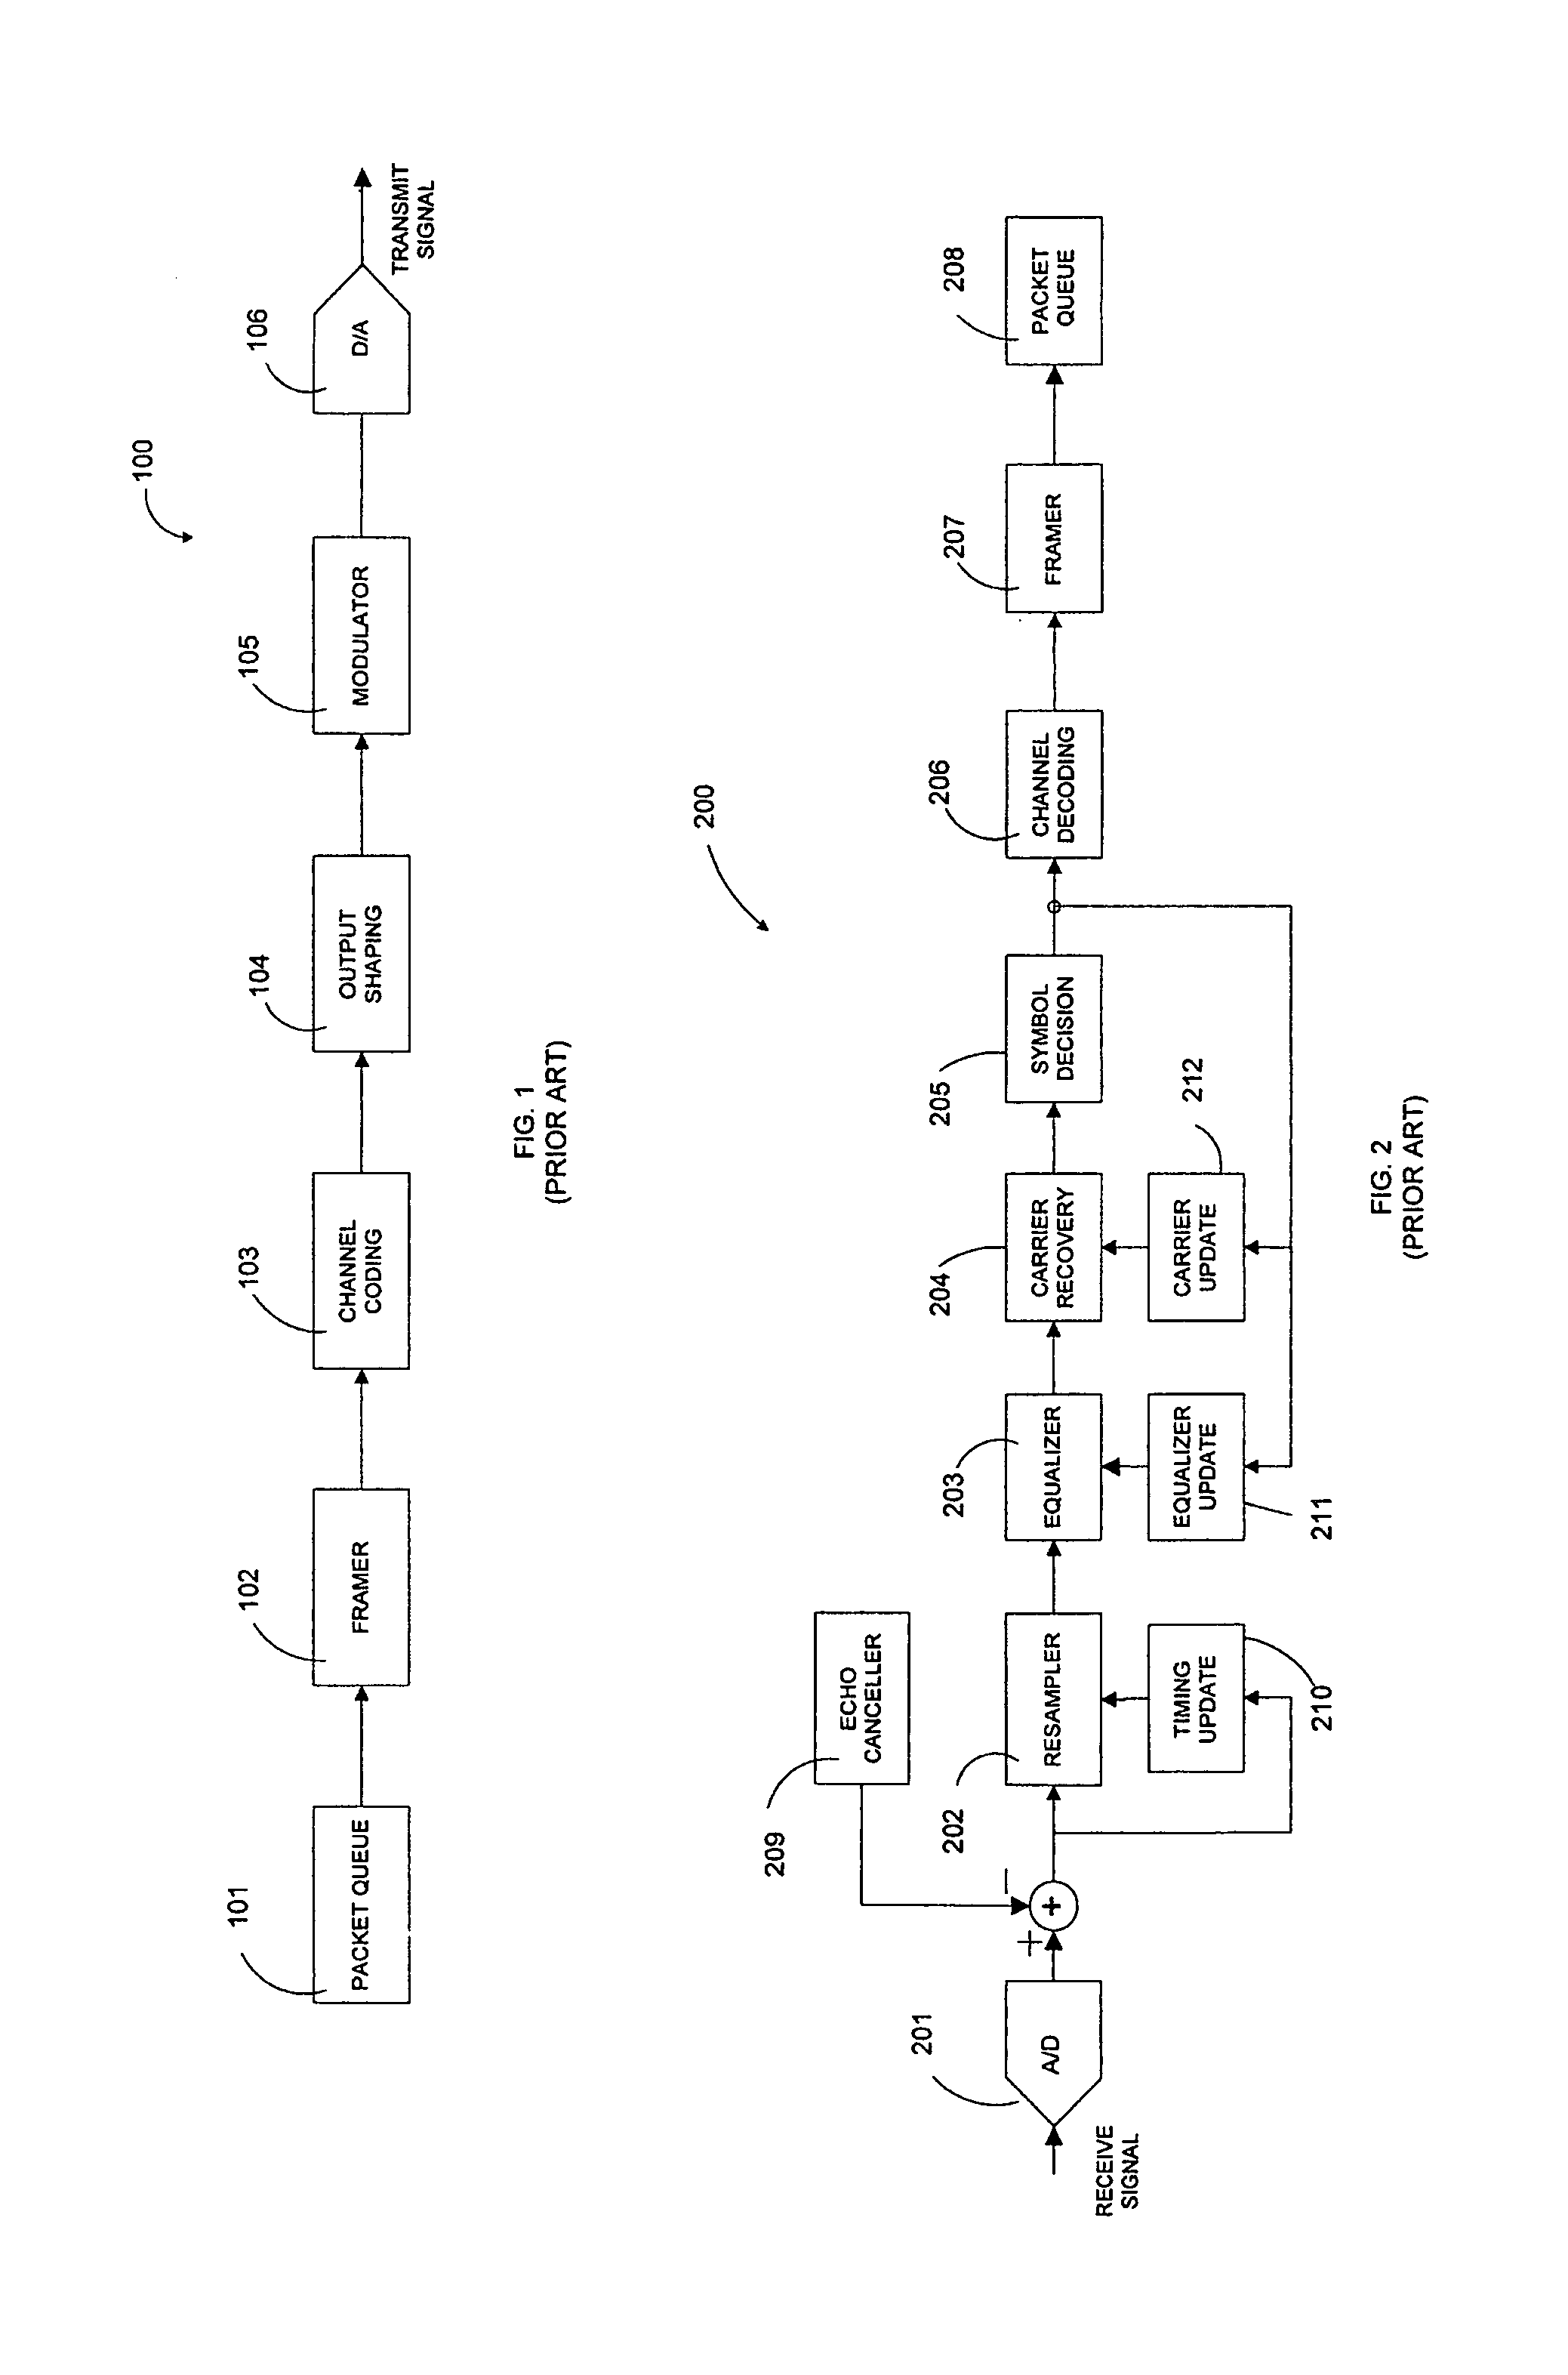 Method and apparatus for reducing signal processing requirements for transmitting packet-based data